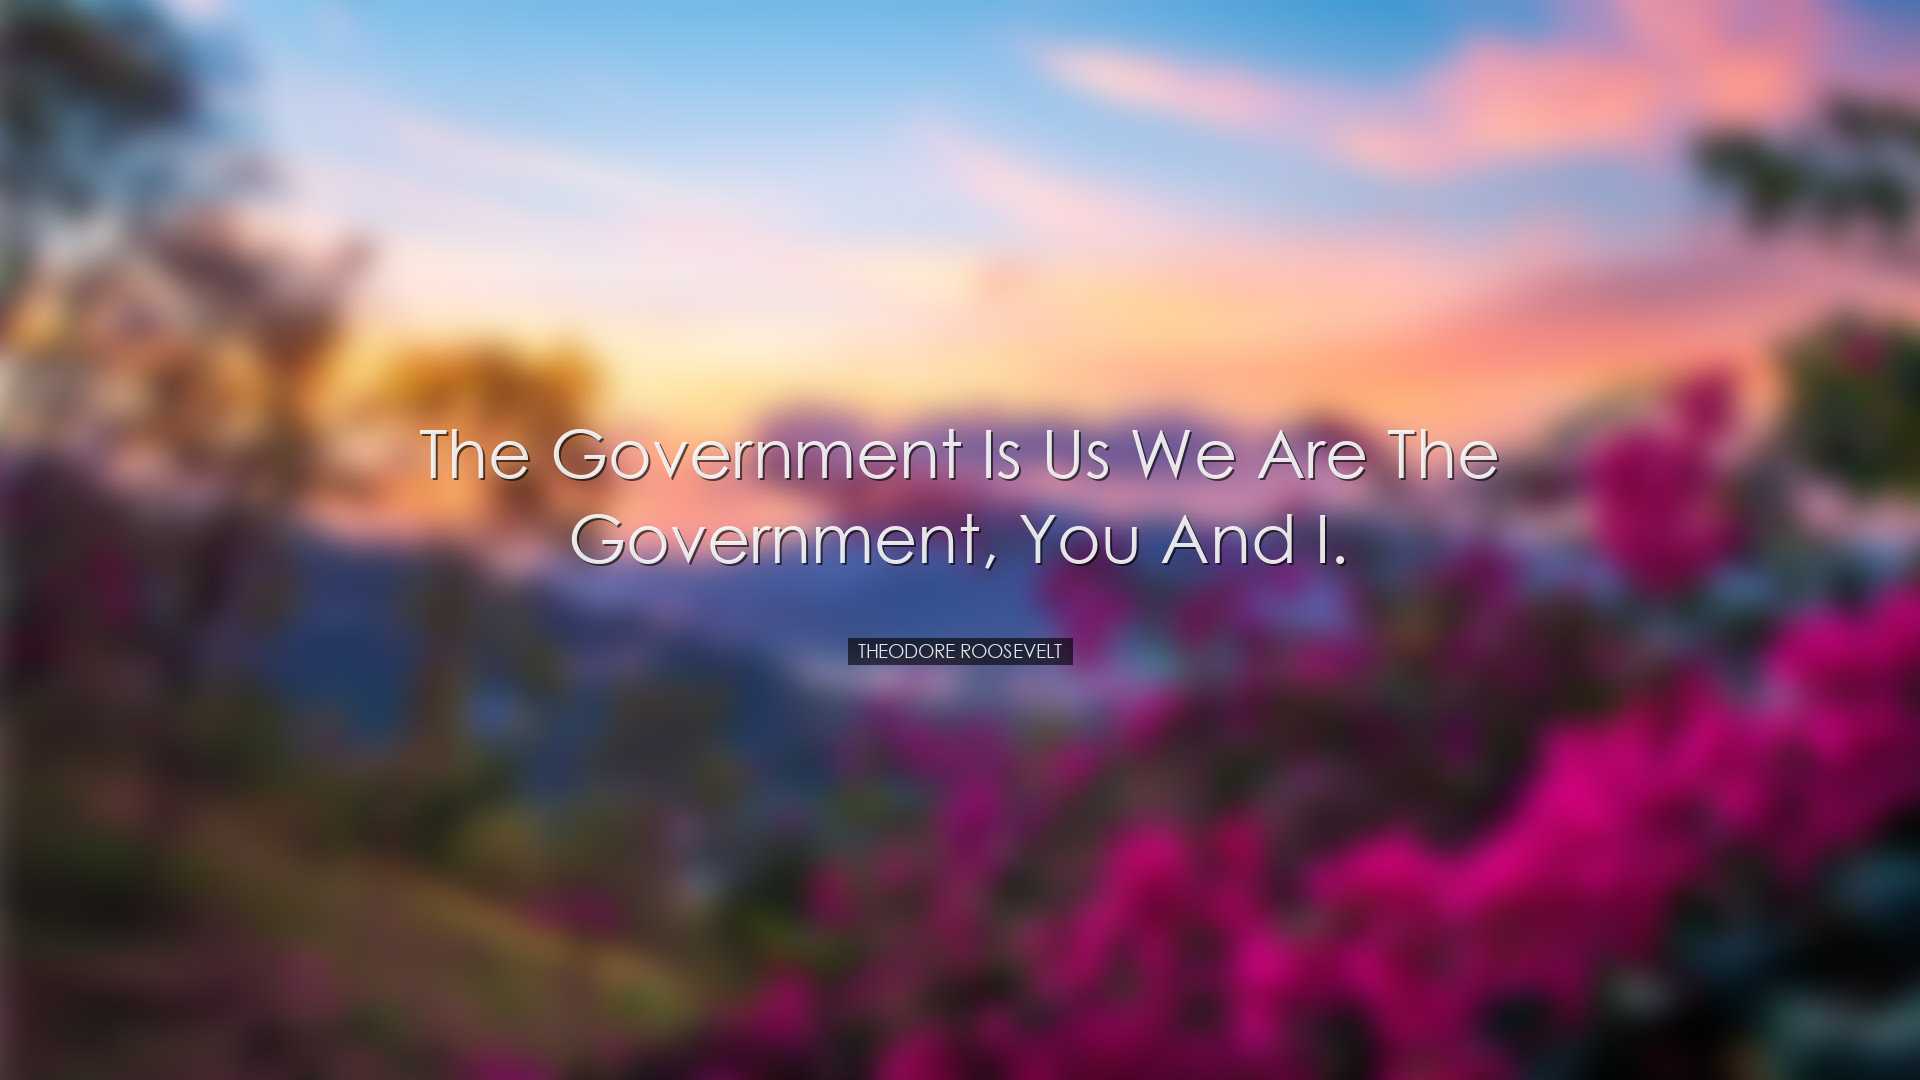 The government is us we are the government, you and I. - Theodore